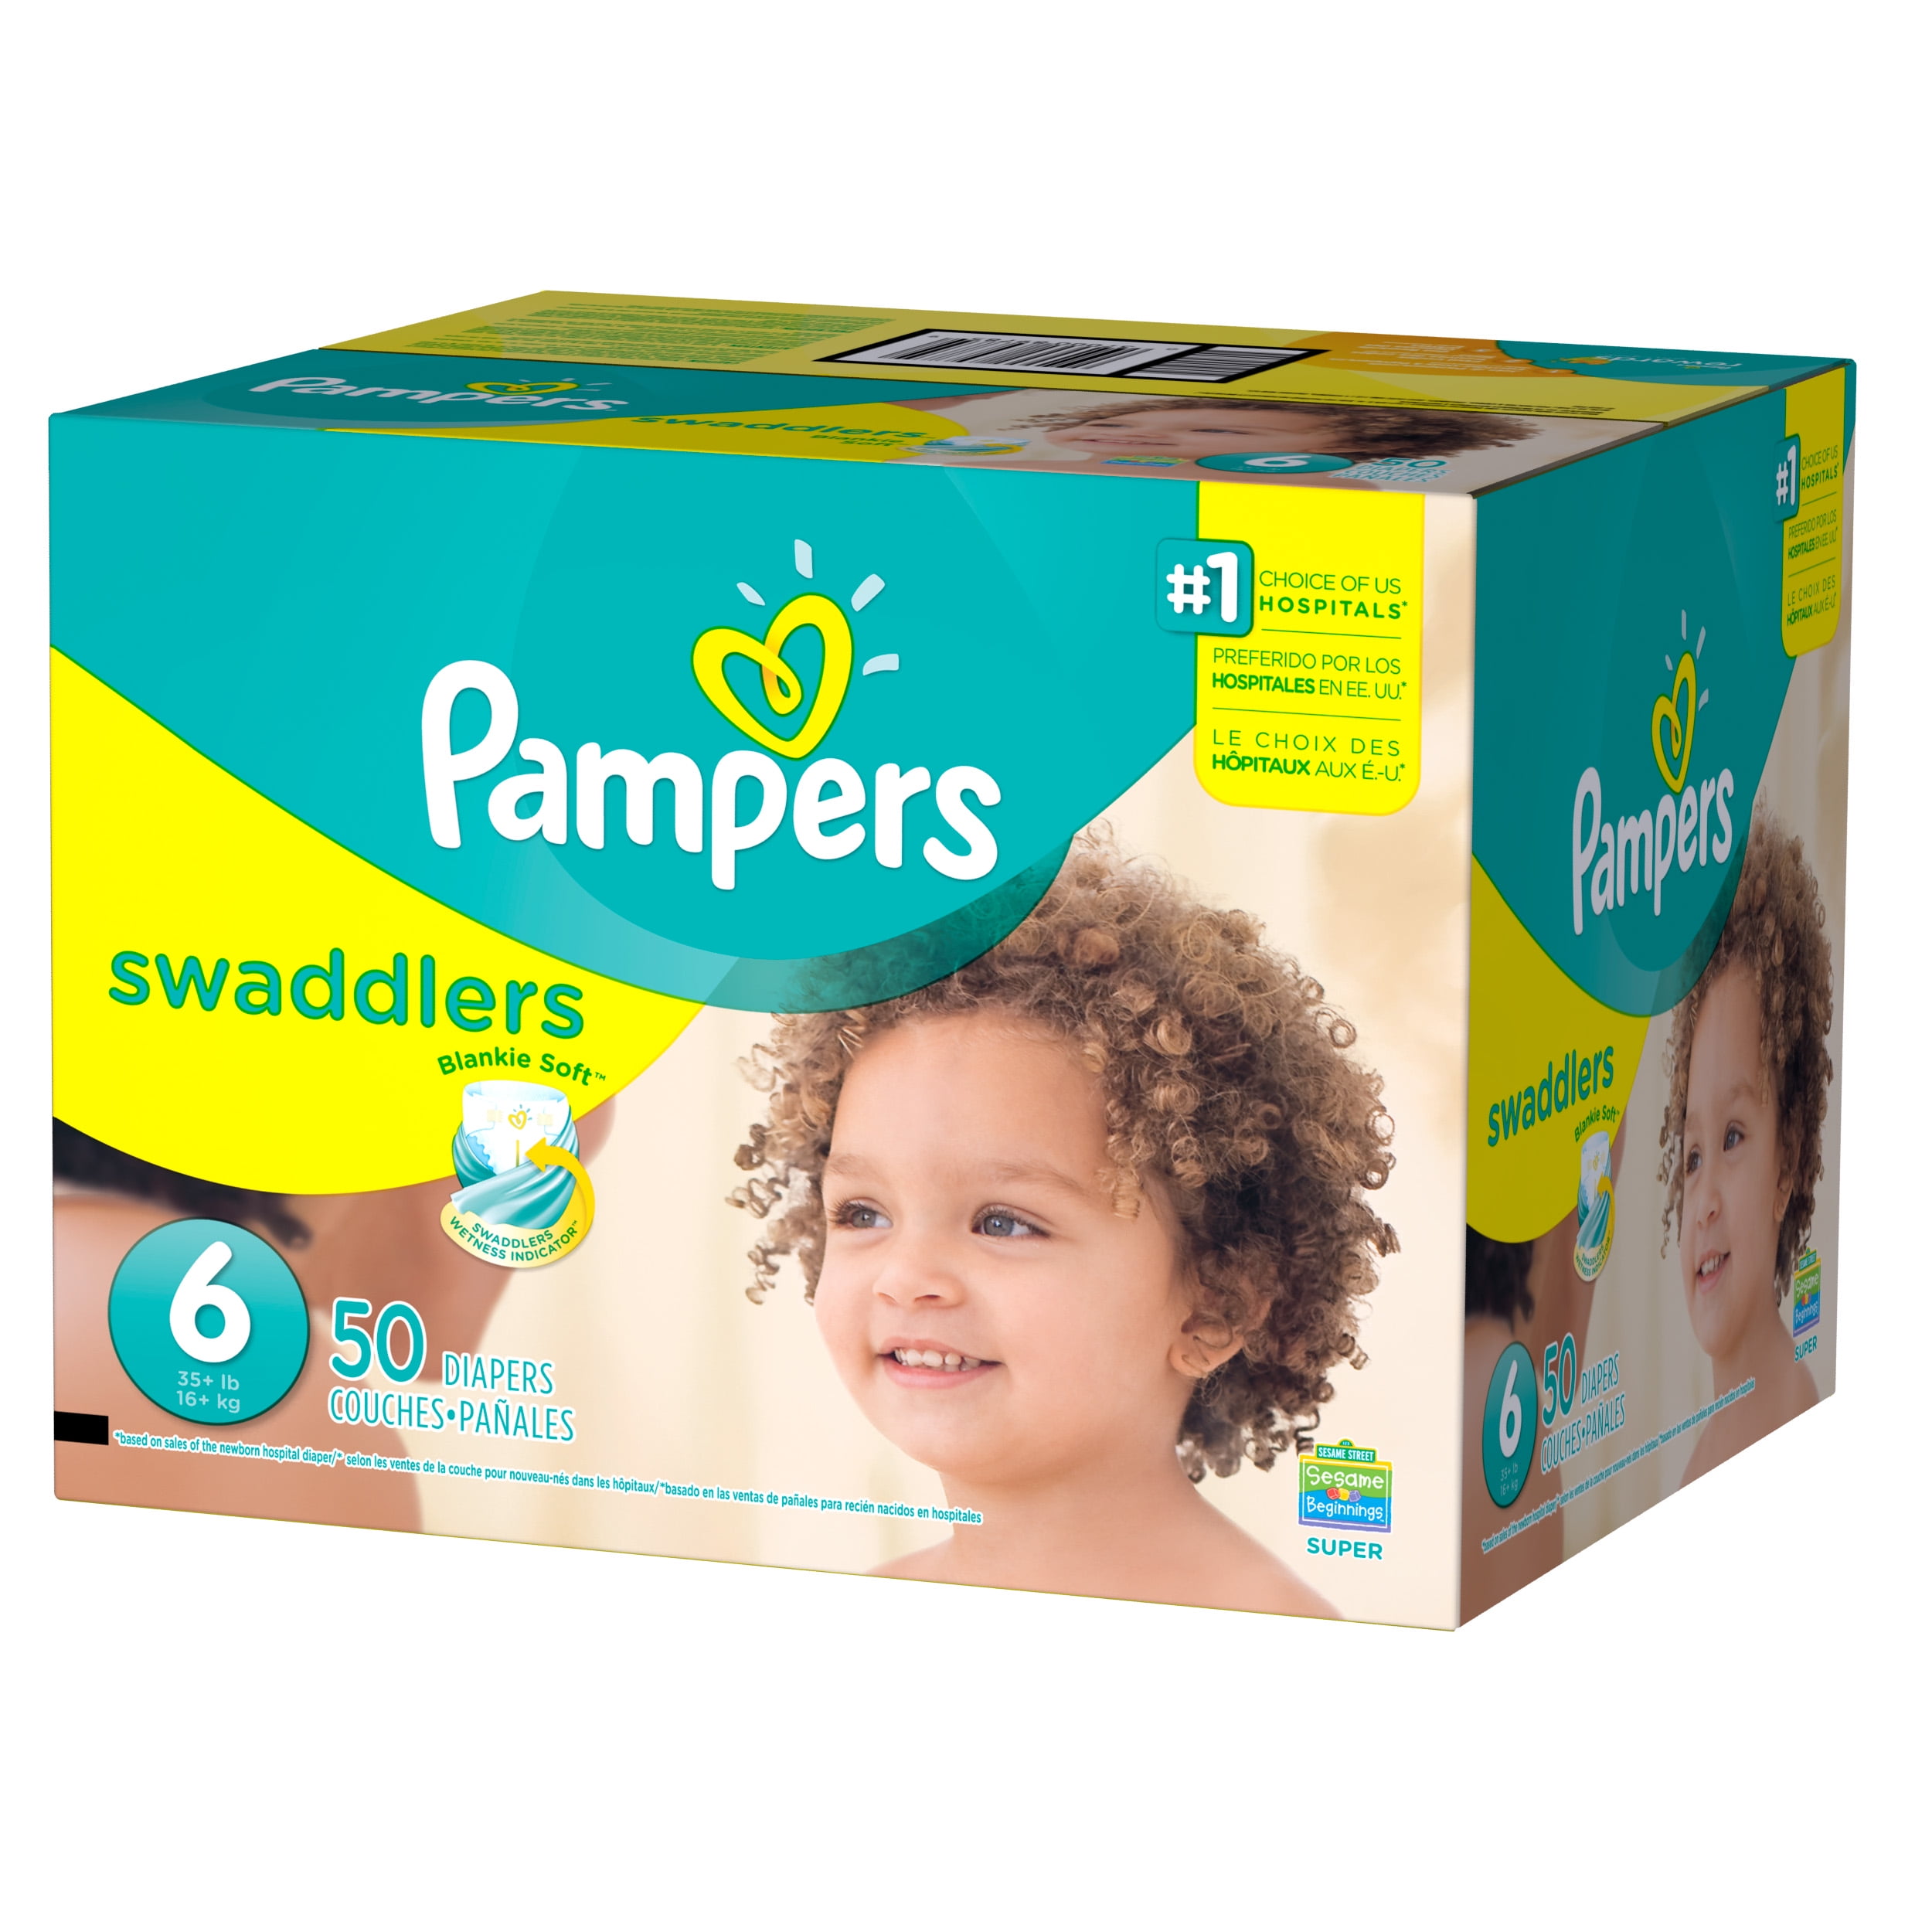 Pampers Swaddlers Diapers Size 6 50 